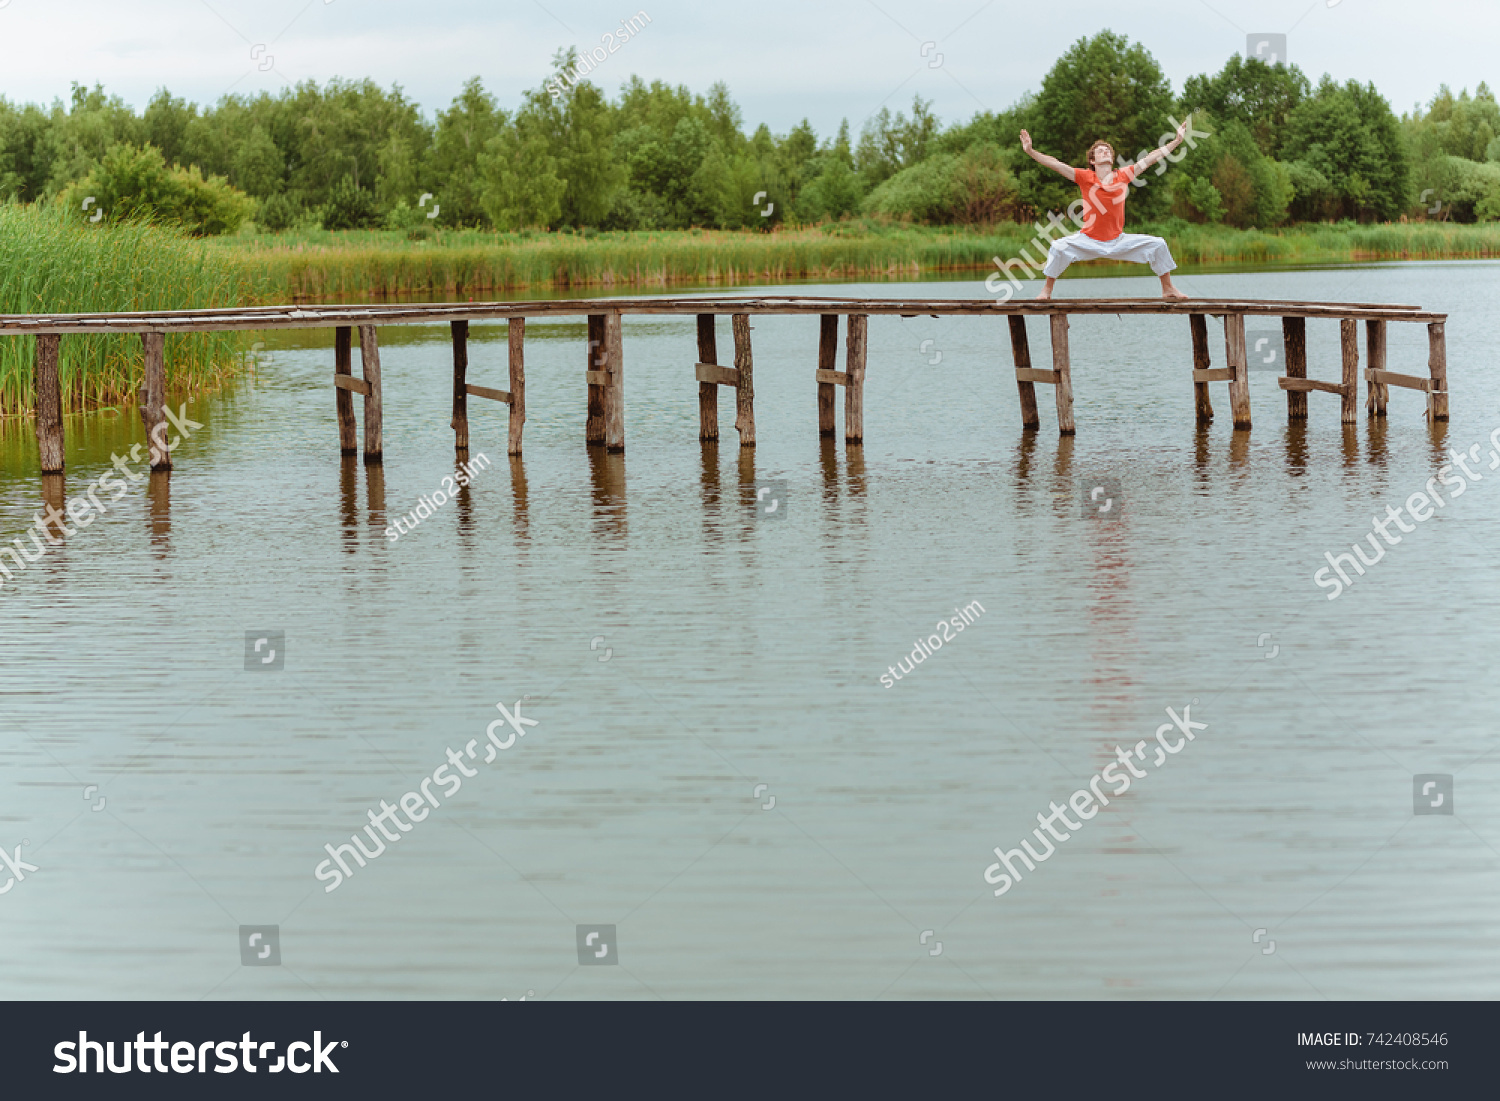 A man doing yoga on wooden pier at the lake #742408546